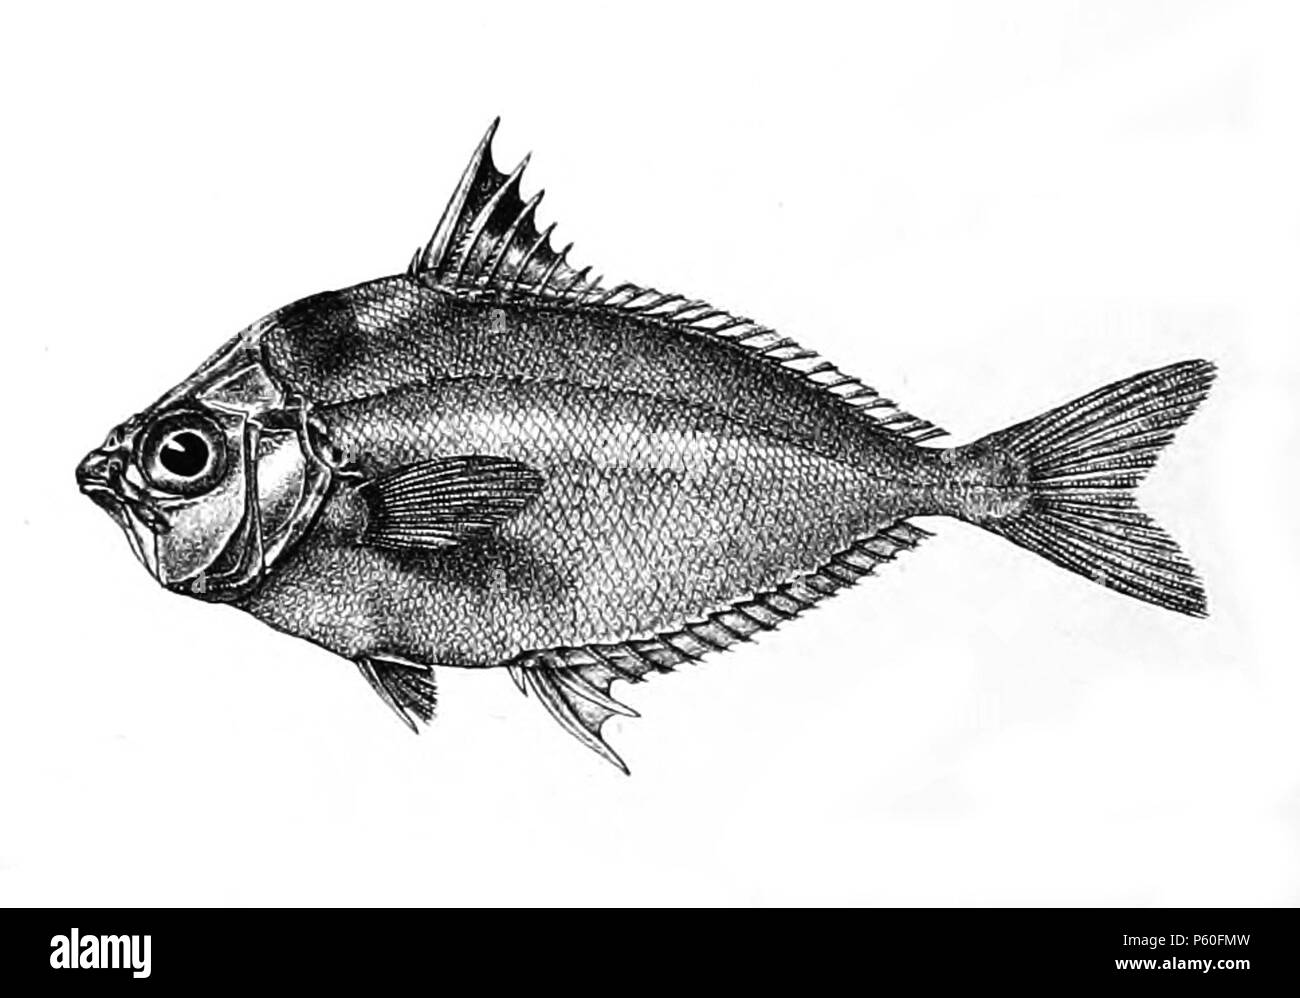 N/A. The species names / identity need verification. The original plates showed the fishes facing right and have been flipped here. Equus blochii . 1878.   George Henry Ford  (1808–1876)    Alternative names G. H. Ford  Description artist  Date of birth/death 20 May 1808 1876  Location of birth/death Cape Colony London  Authority control  : Q17105498 VIAF:317102730 LCCN:n2015185868 WorldCat 520 Equus blochii Ford 52 Stock Photo